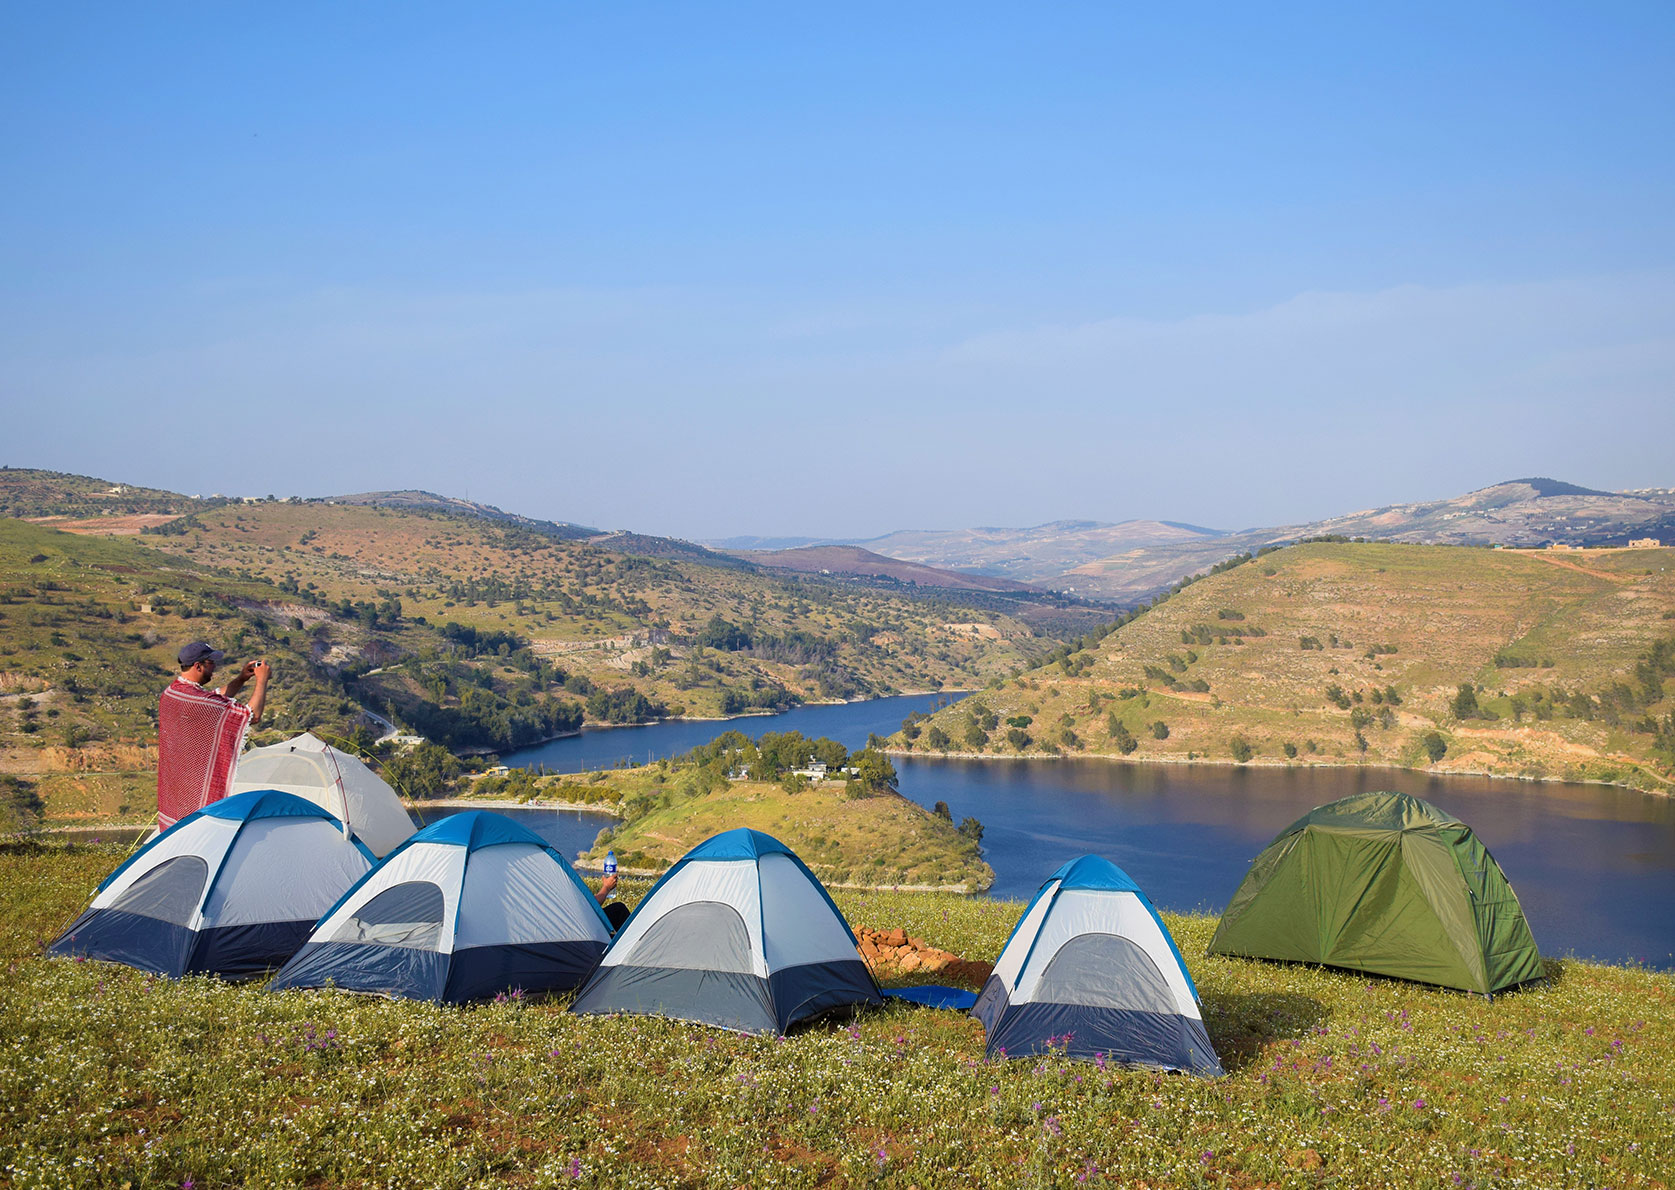 Best long distance hikes in the world Jordan Trail springtime by the lake in the Rmemeen region